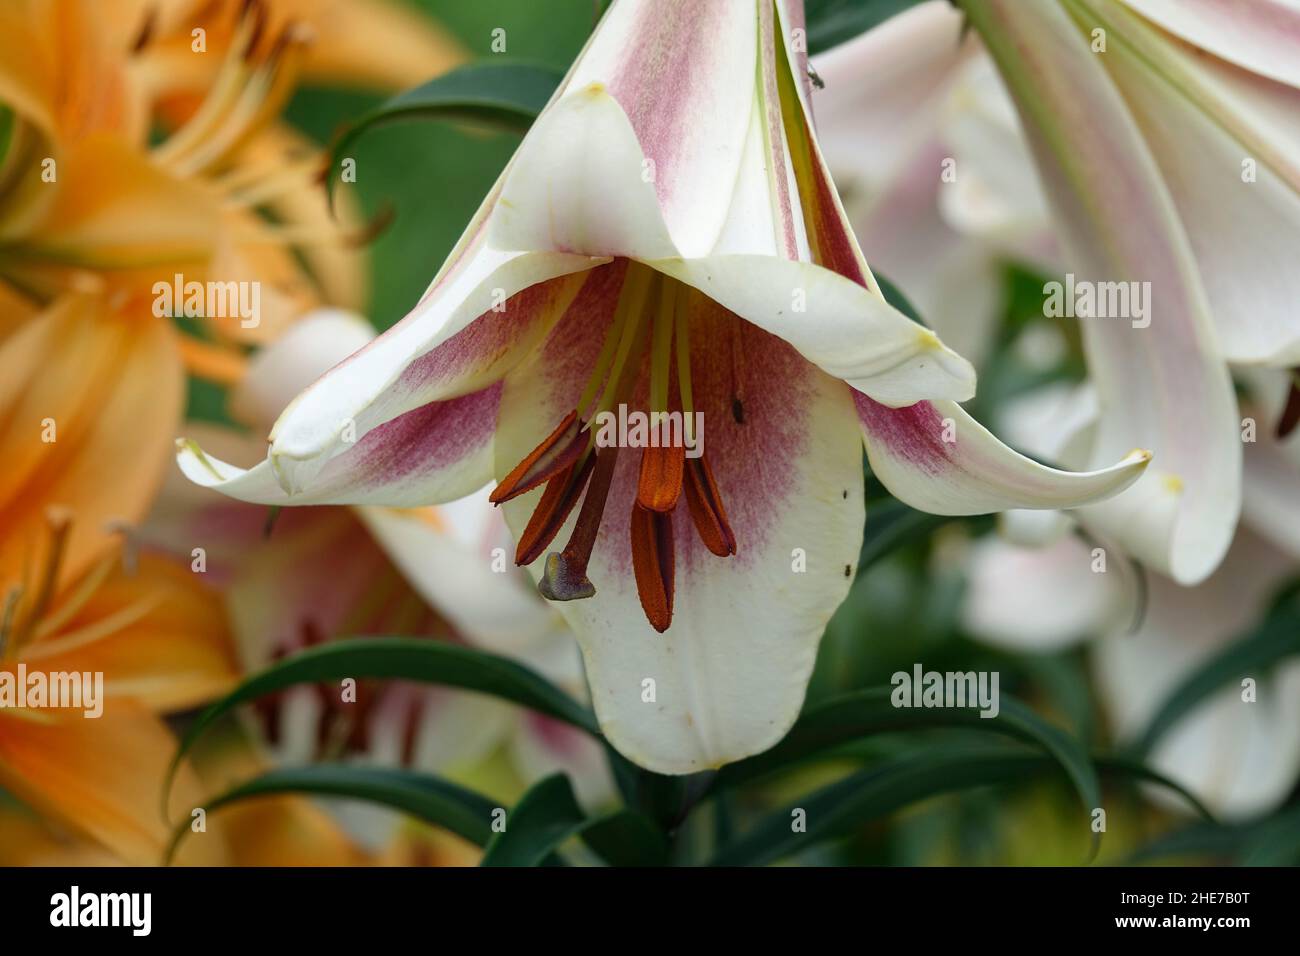 Lilium regale, also called the regal lily, royal lily, king's lily with trumpet-shaped flowers alongside a cluster of Orange Lilies in a Garden Stock Photo